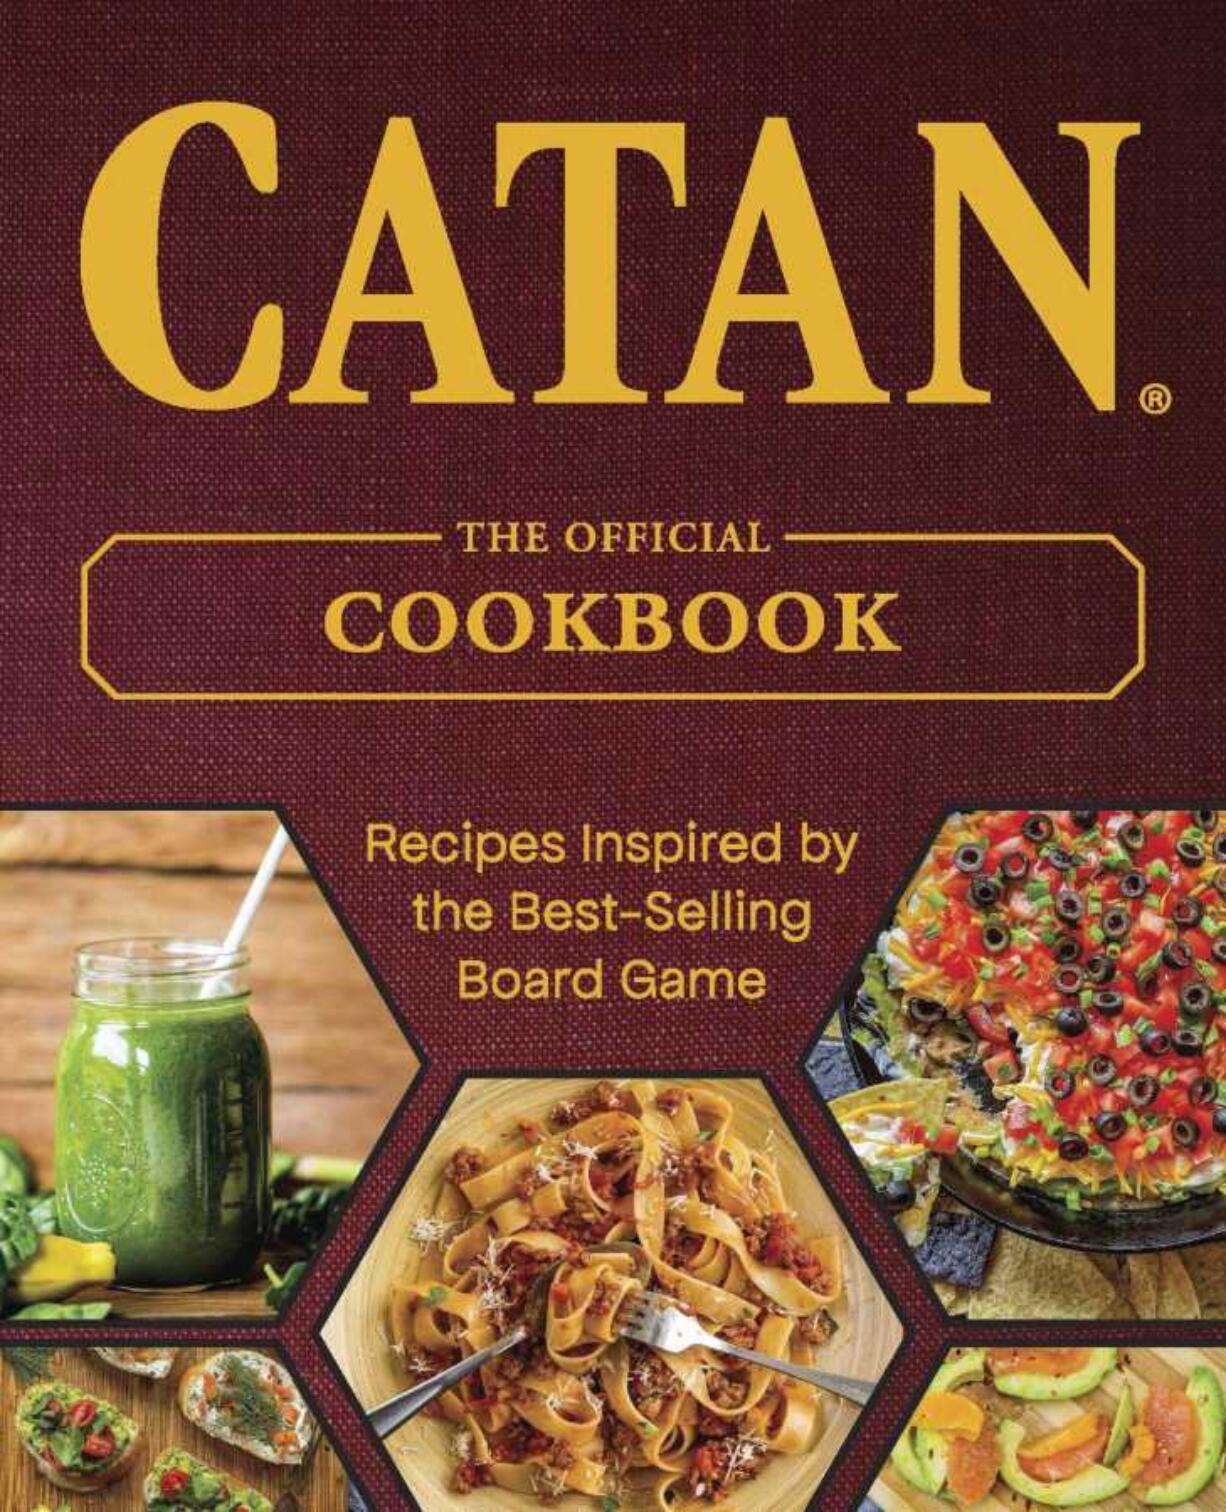 "Catan: The Official Cookbook" includes 77 recipes inspired by the multiplayer game phenomenon, dishes like Forest Dweller's Dip, Tavern Ale Pie and Fireside Banana Boats.